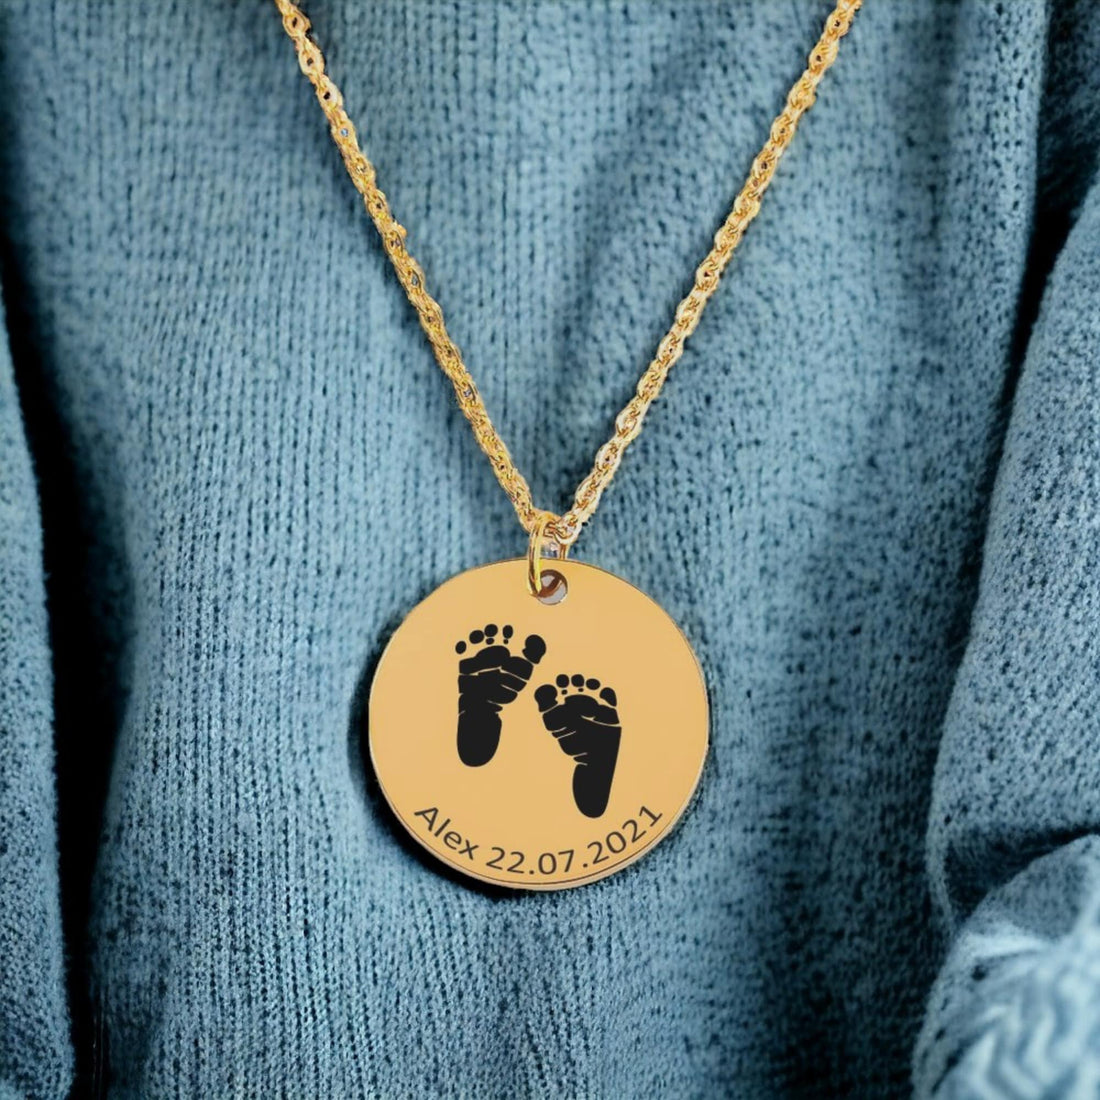 Baby Footprint Necklace, Push Present, Baby Feet Necklace, Baby Name Necklace, First Time Mom Gift - Gathering Littles